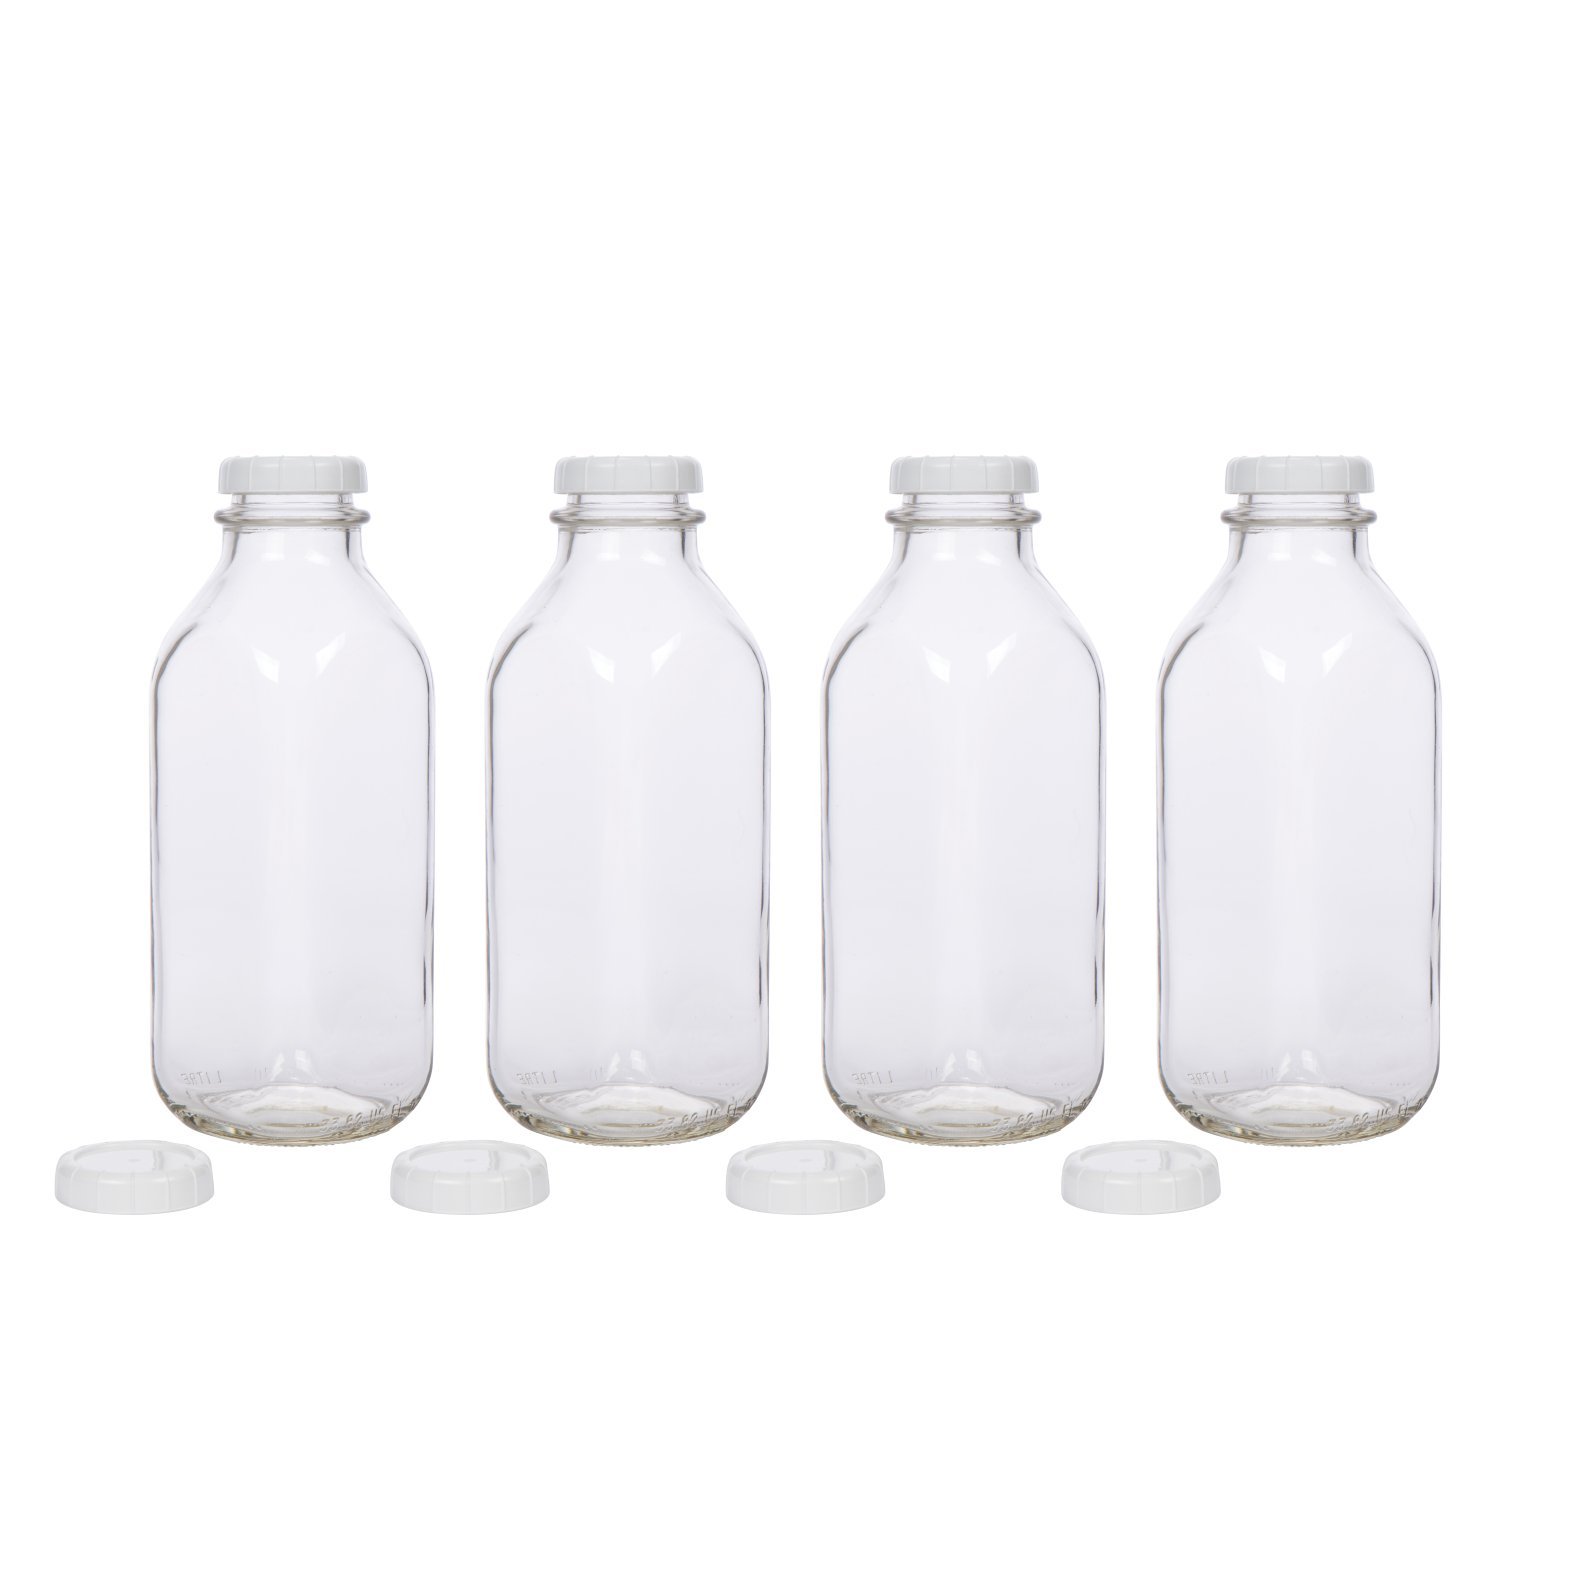 Best Rated in Carafes & Pitchers & Helpful Customer Reviews - Amazon.com